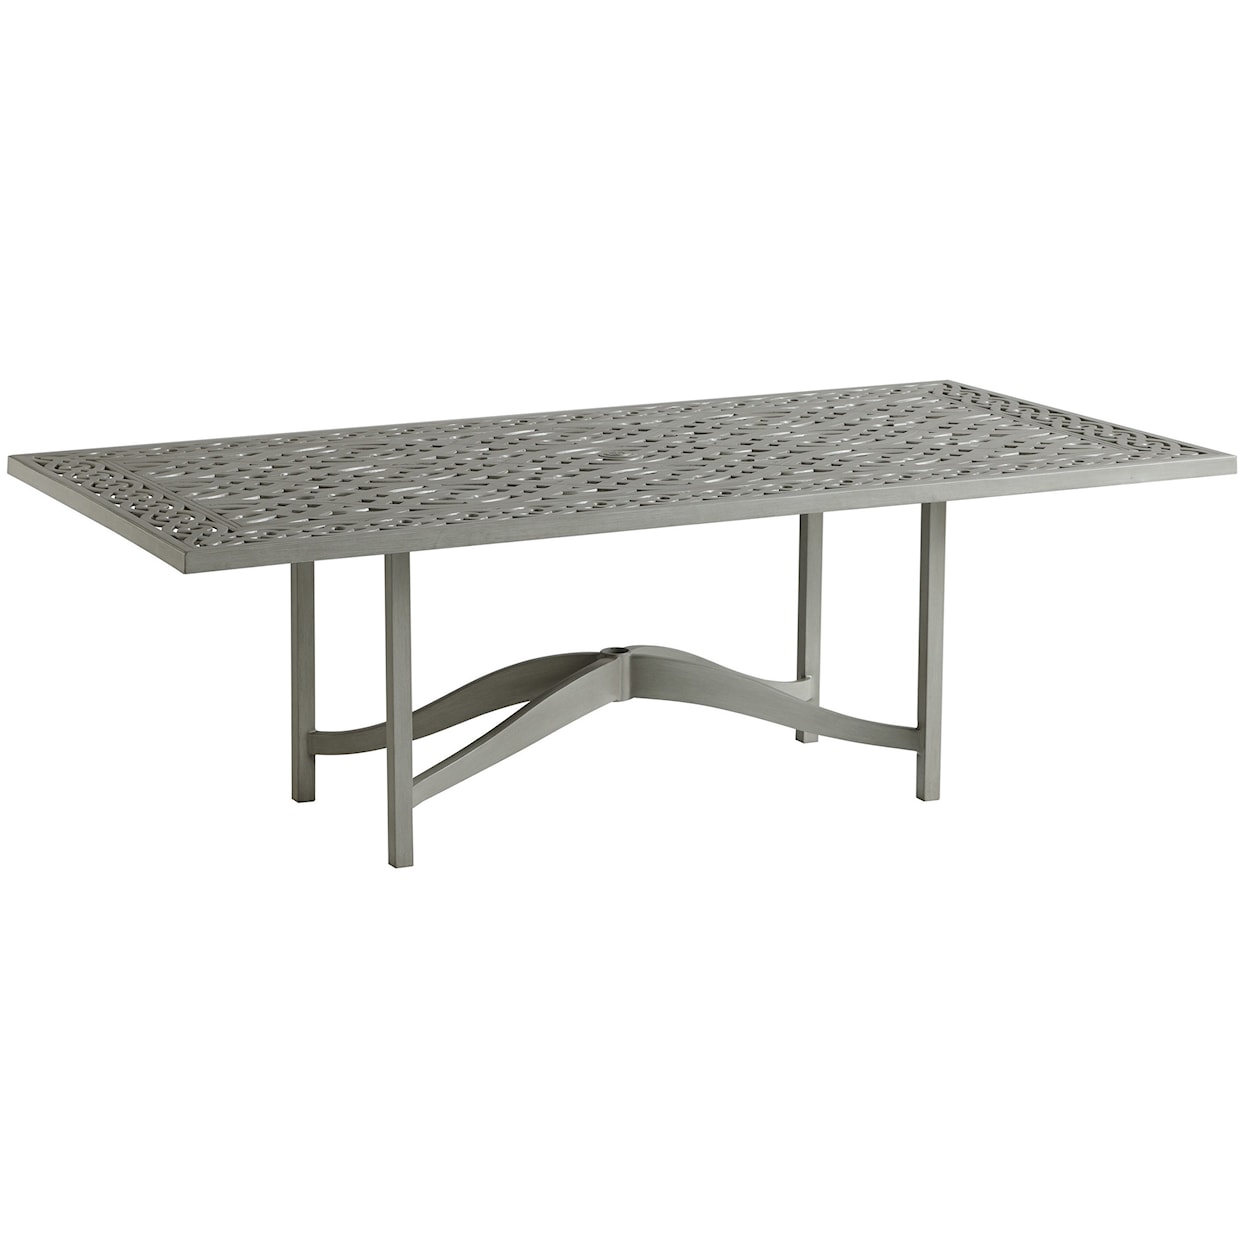 Tommy Bahama Outdoor Living Silver Sands Rectangular Dining Table